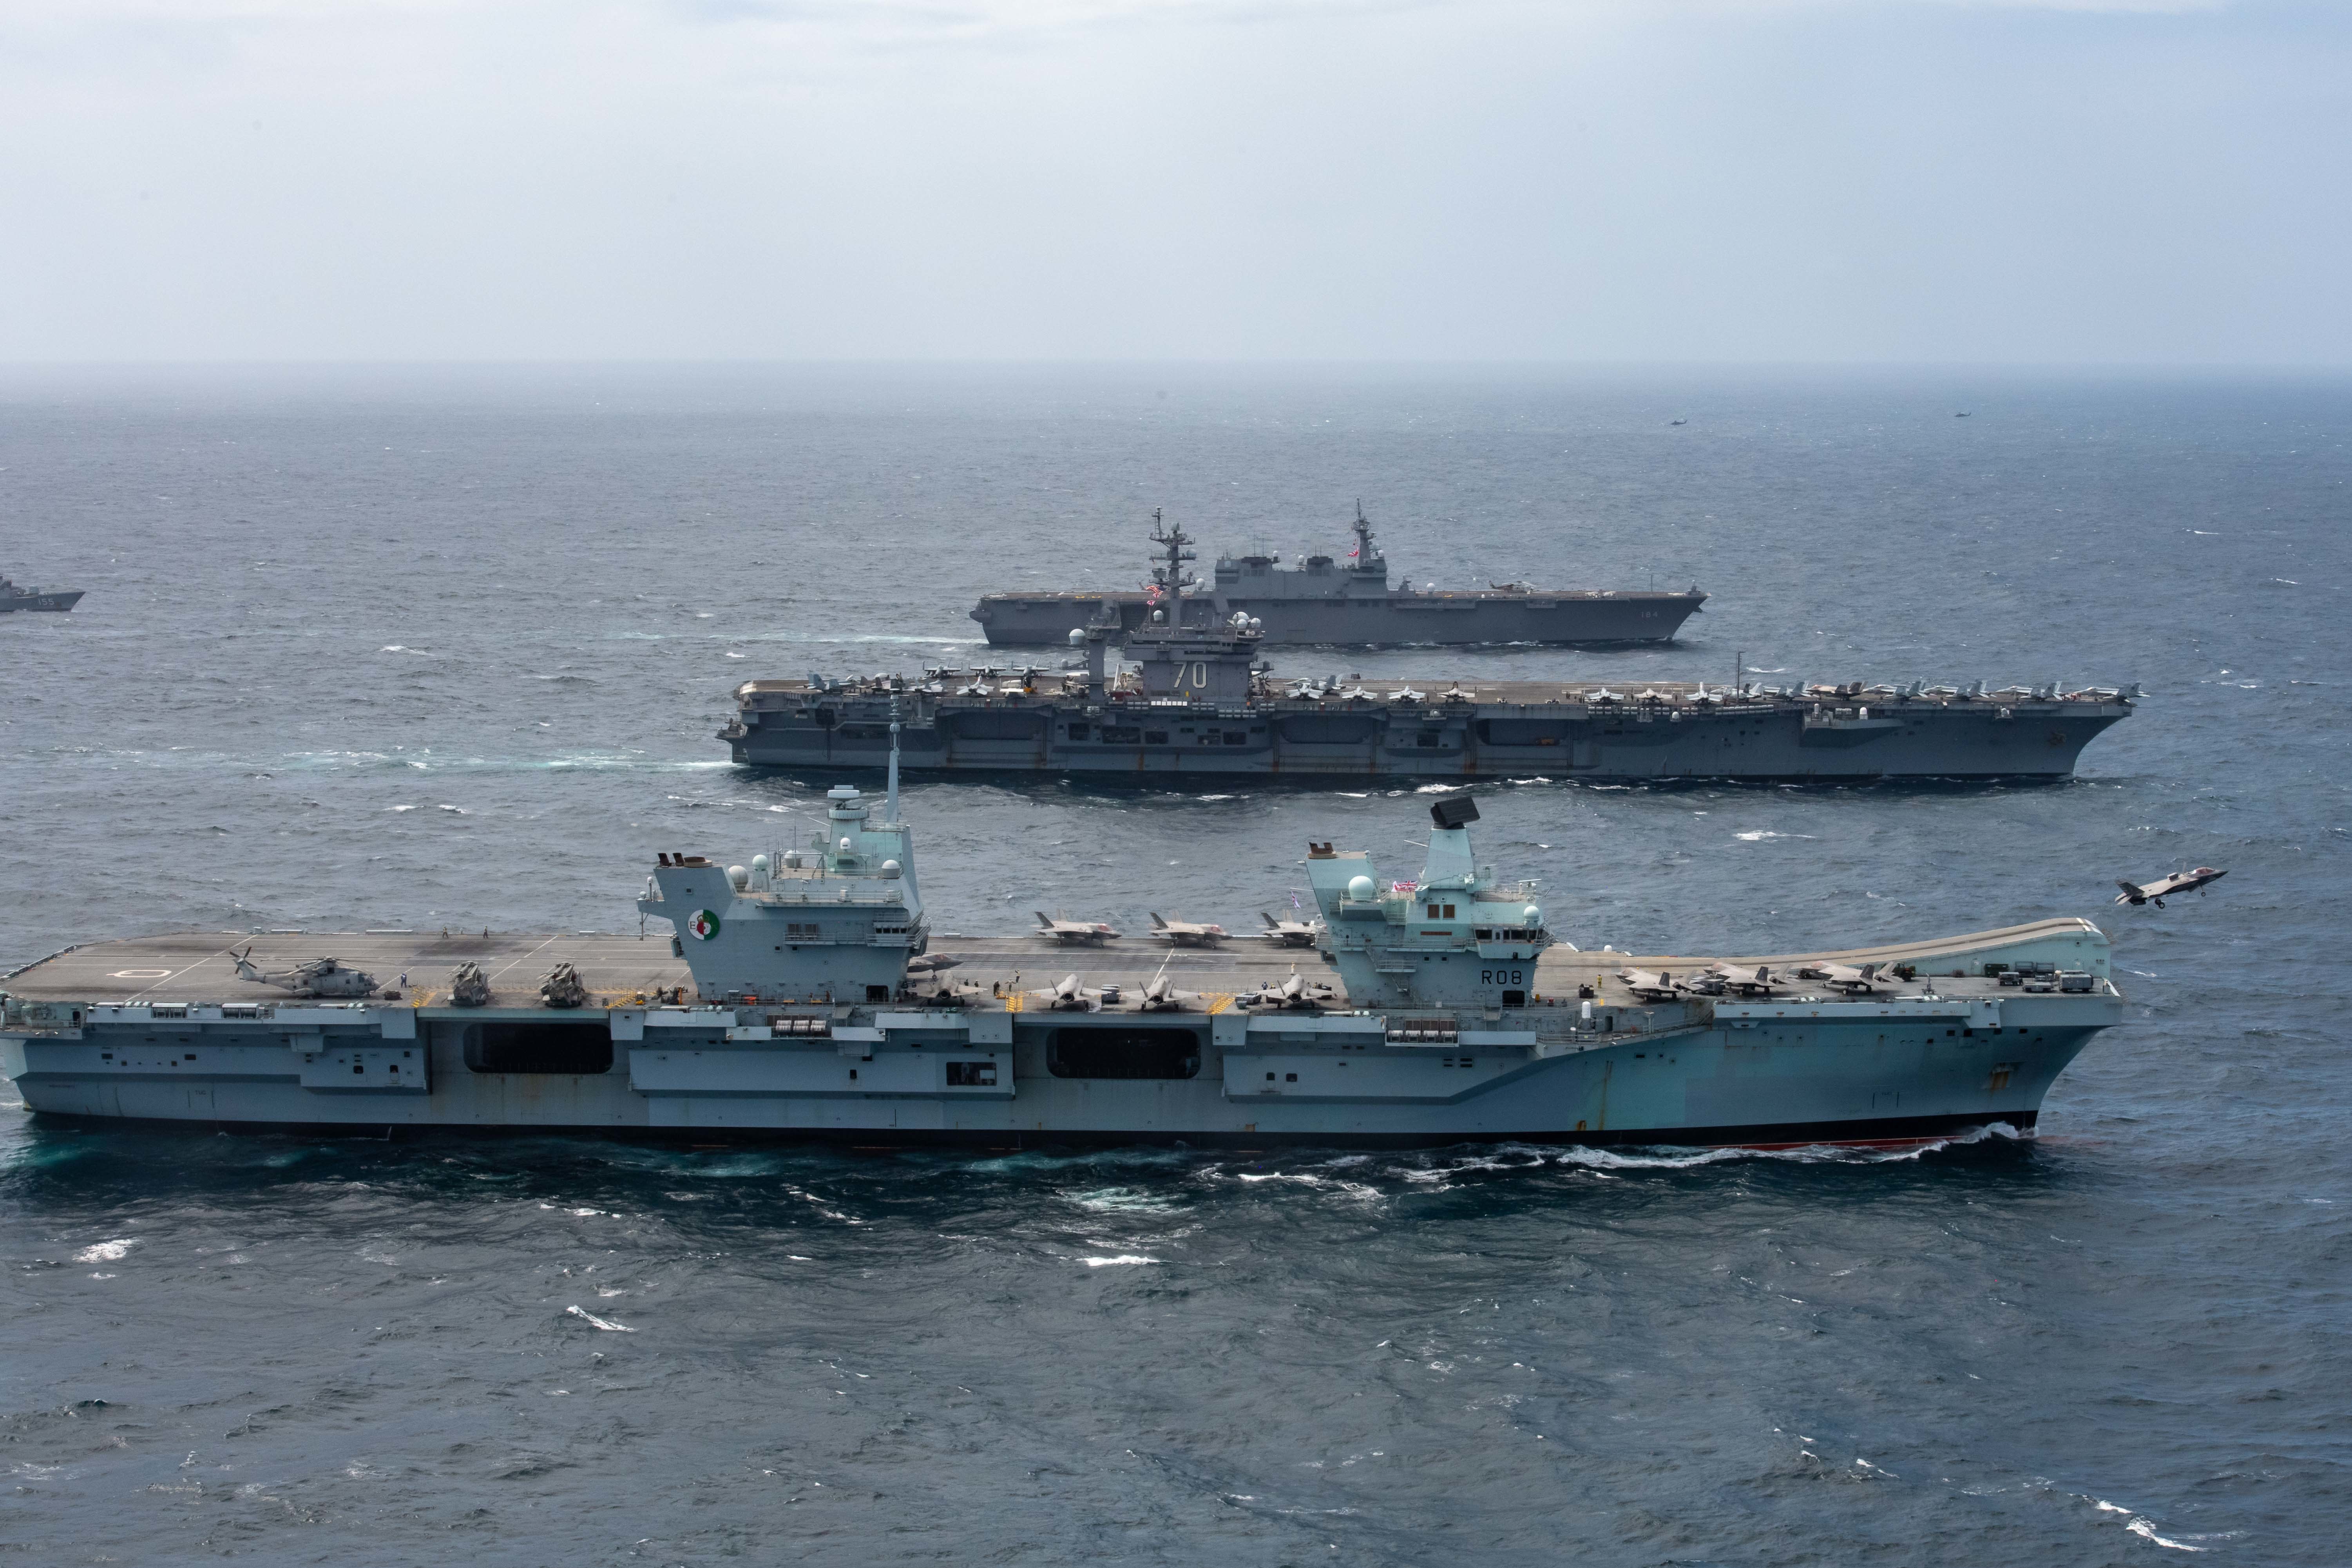 Three aircraft carriers.